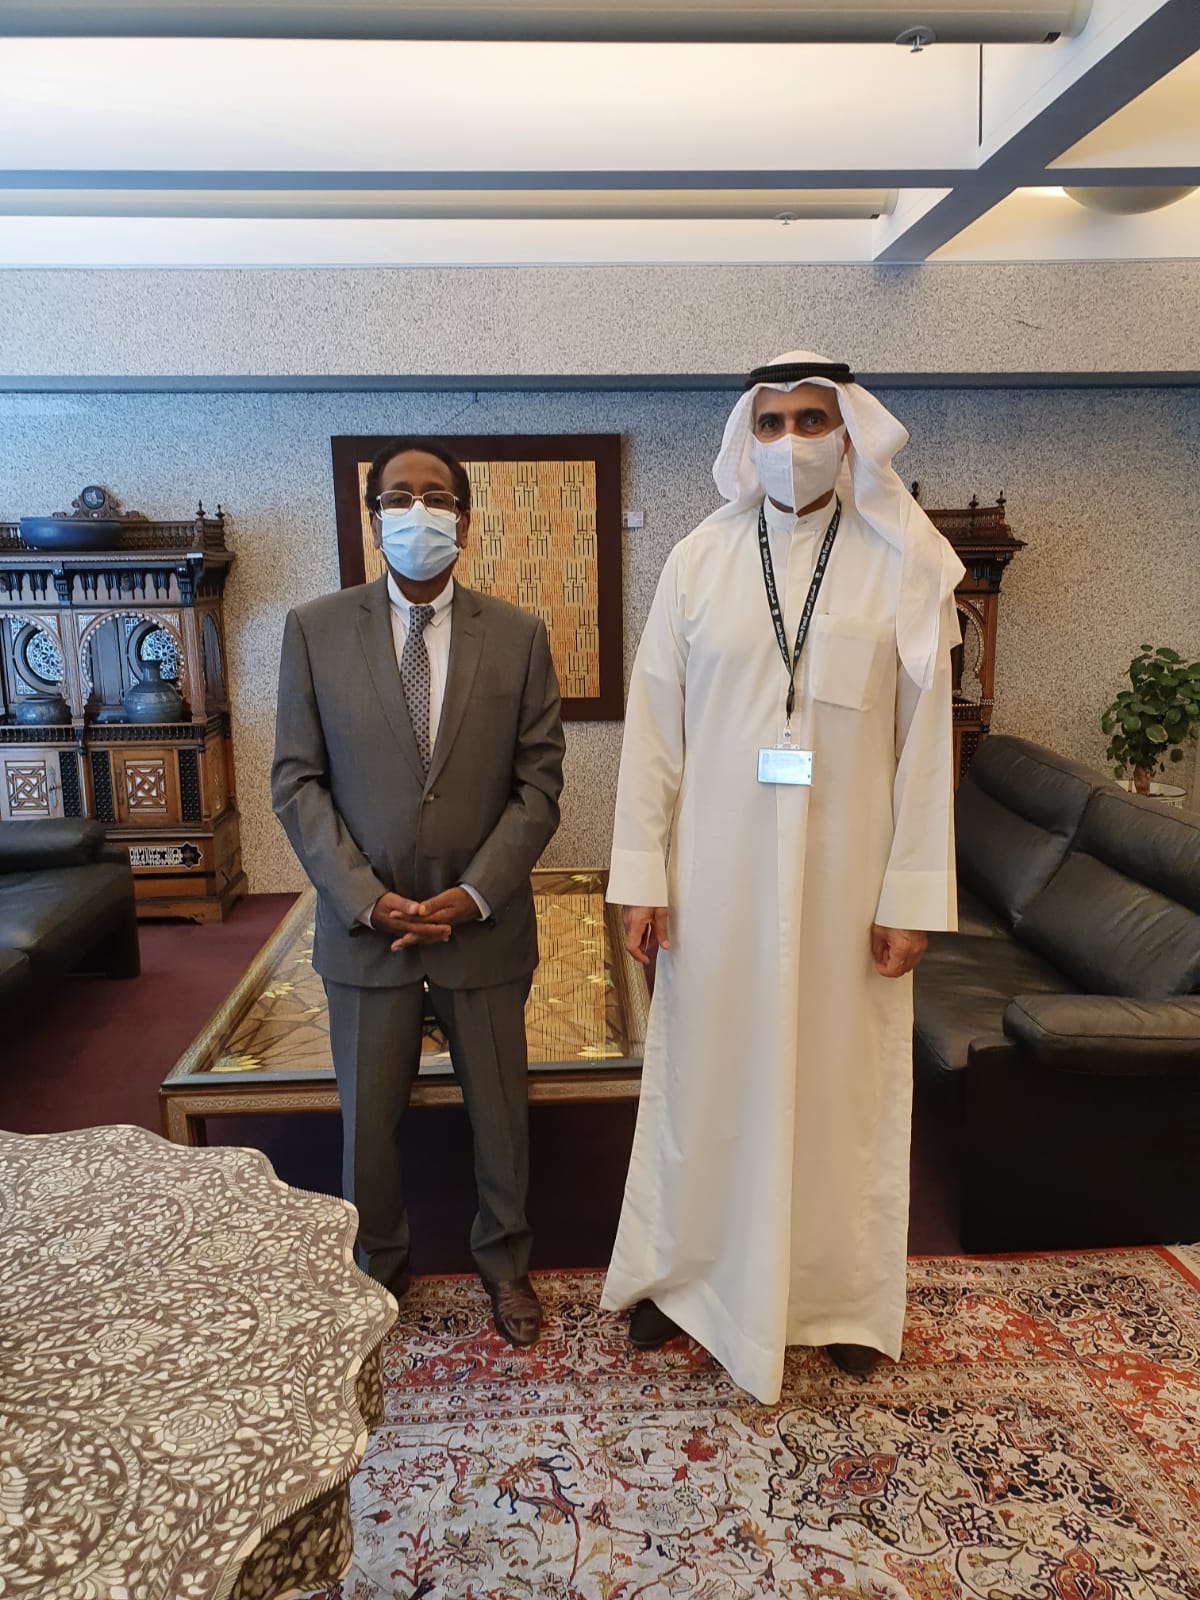 The meeting of His Excellency the Ambassador with the Director General of the Chairman of the Board of Directors of the Arab Fund for Economic and Social Development